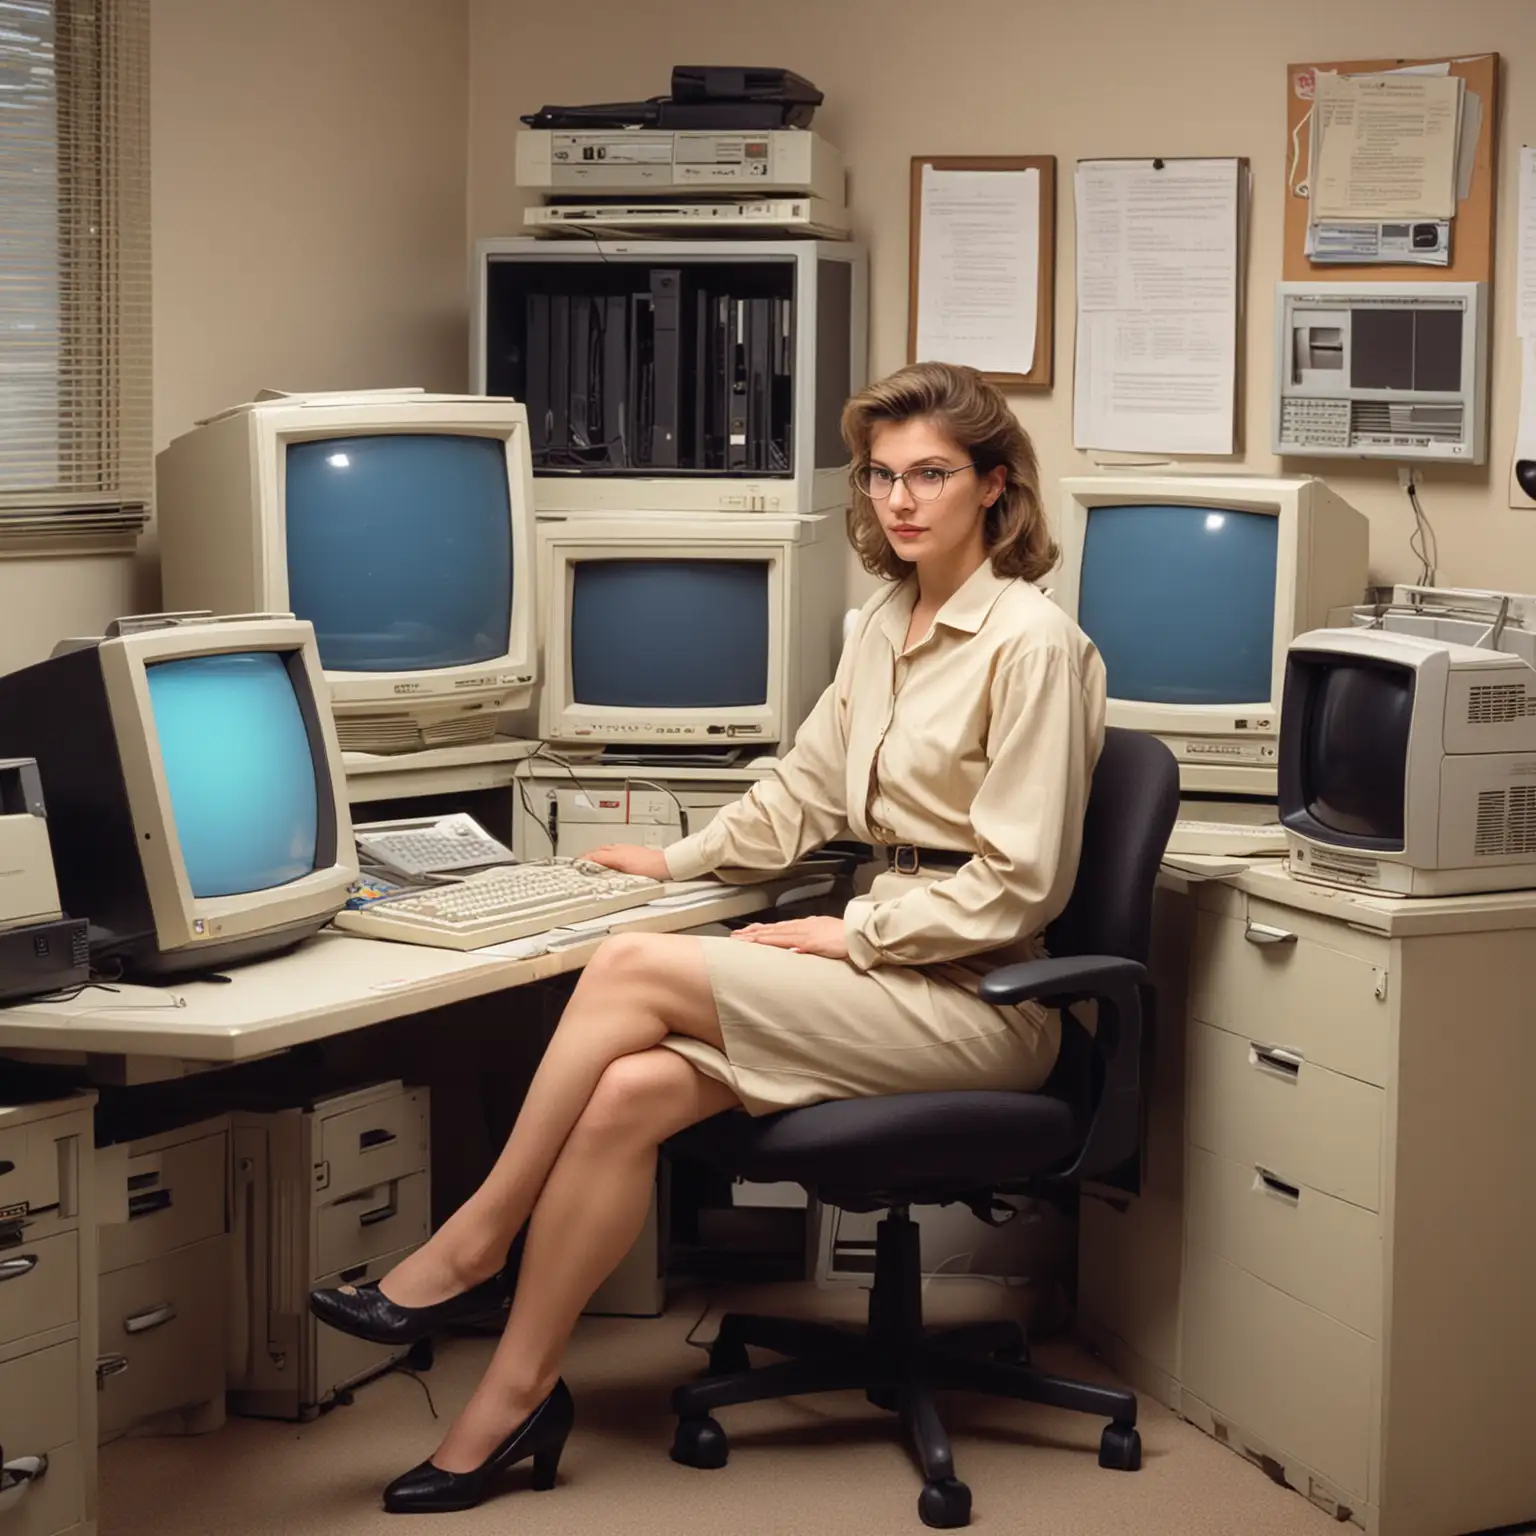 1990s Programmer Working at Vintage Desk with CRT Monitors